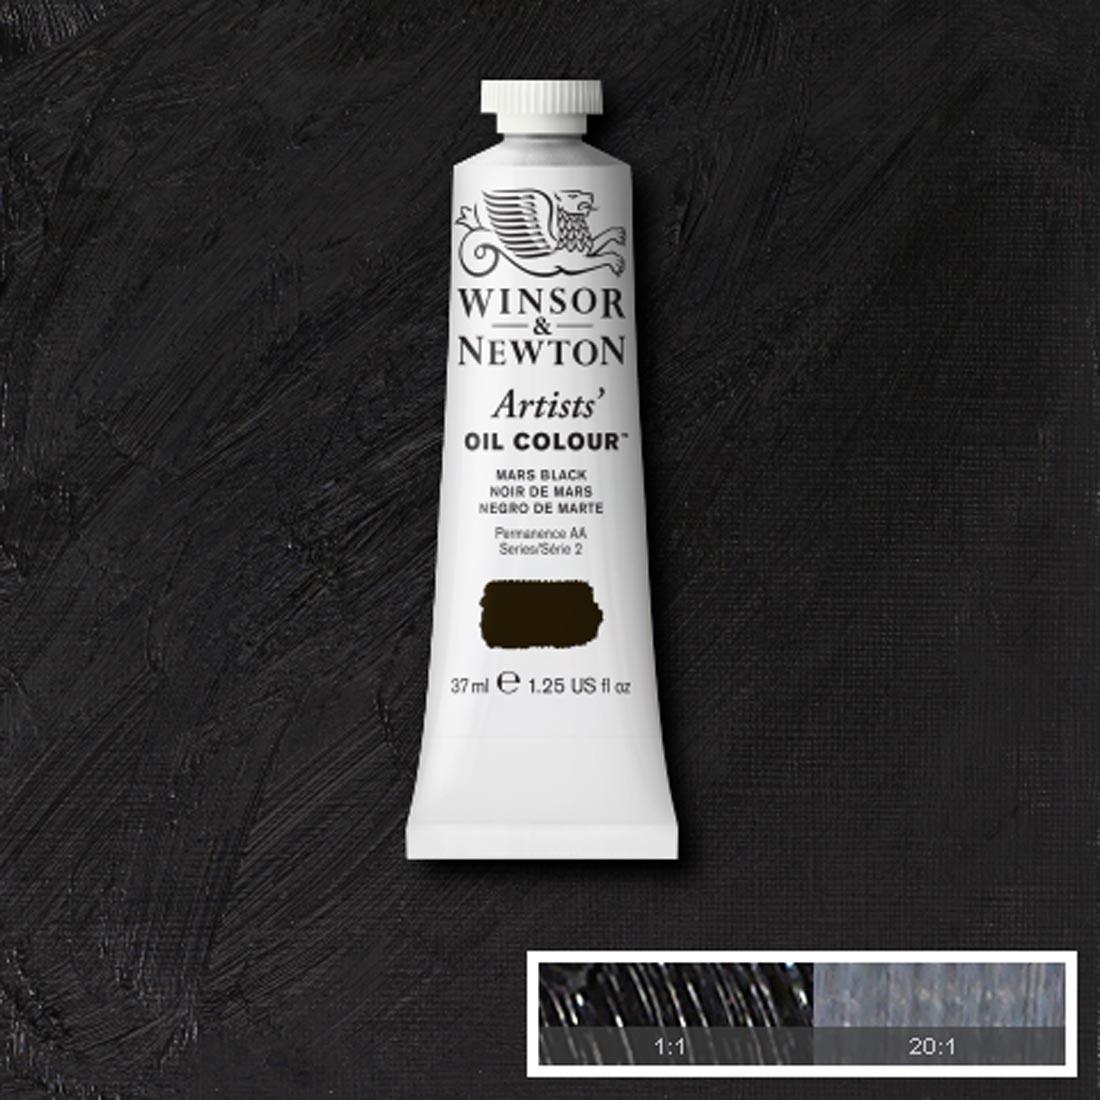 Tube of Mars Black Winsor & Newton Artists' Oil Colour with a paint swatch for the background